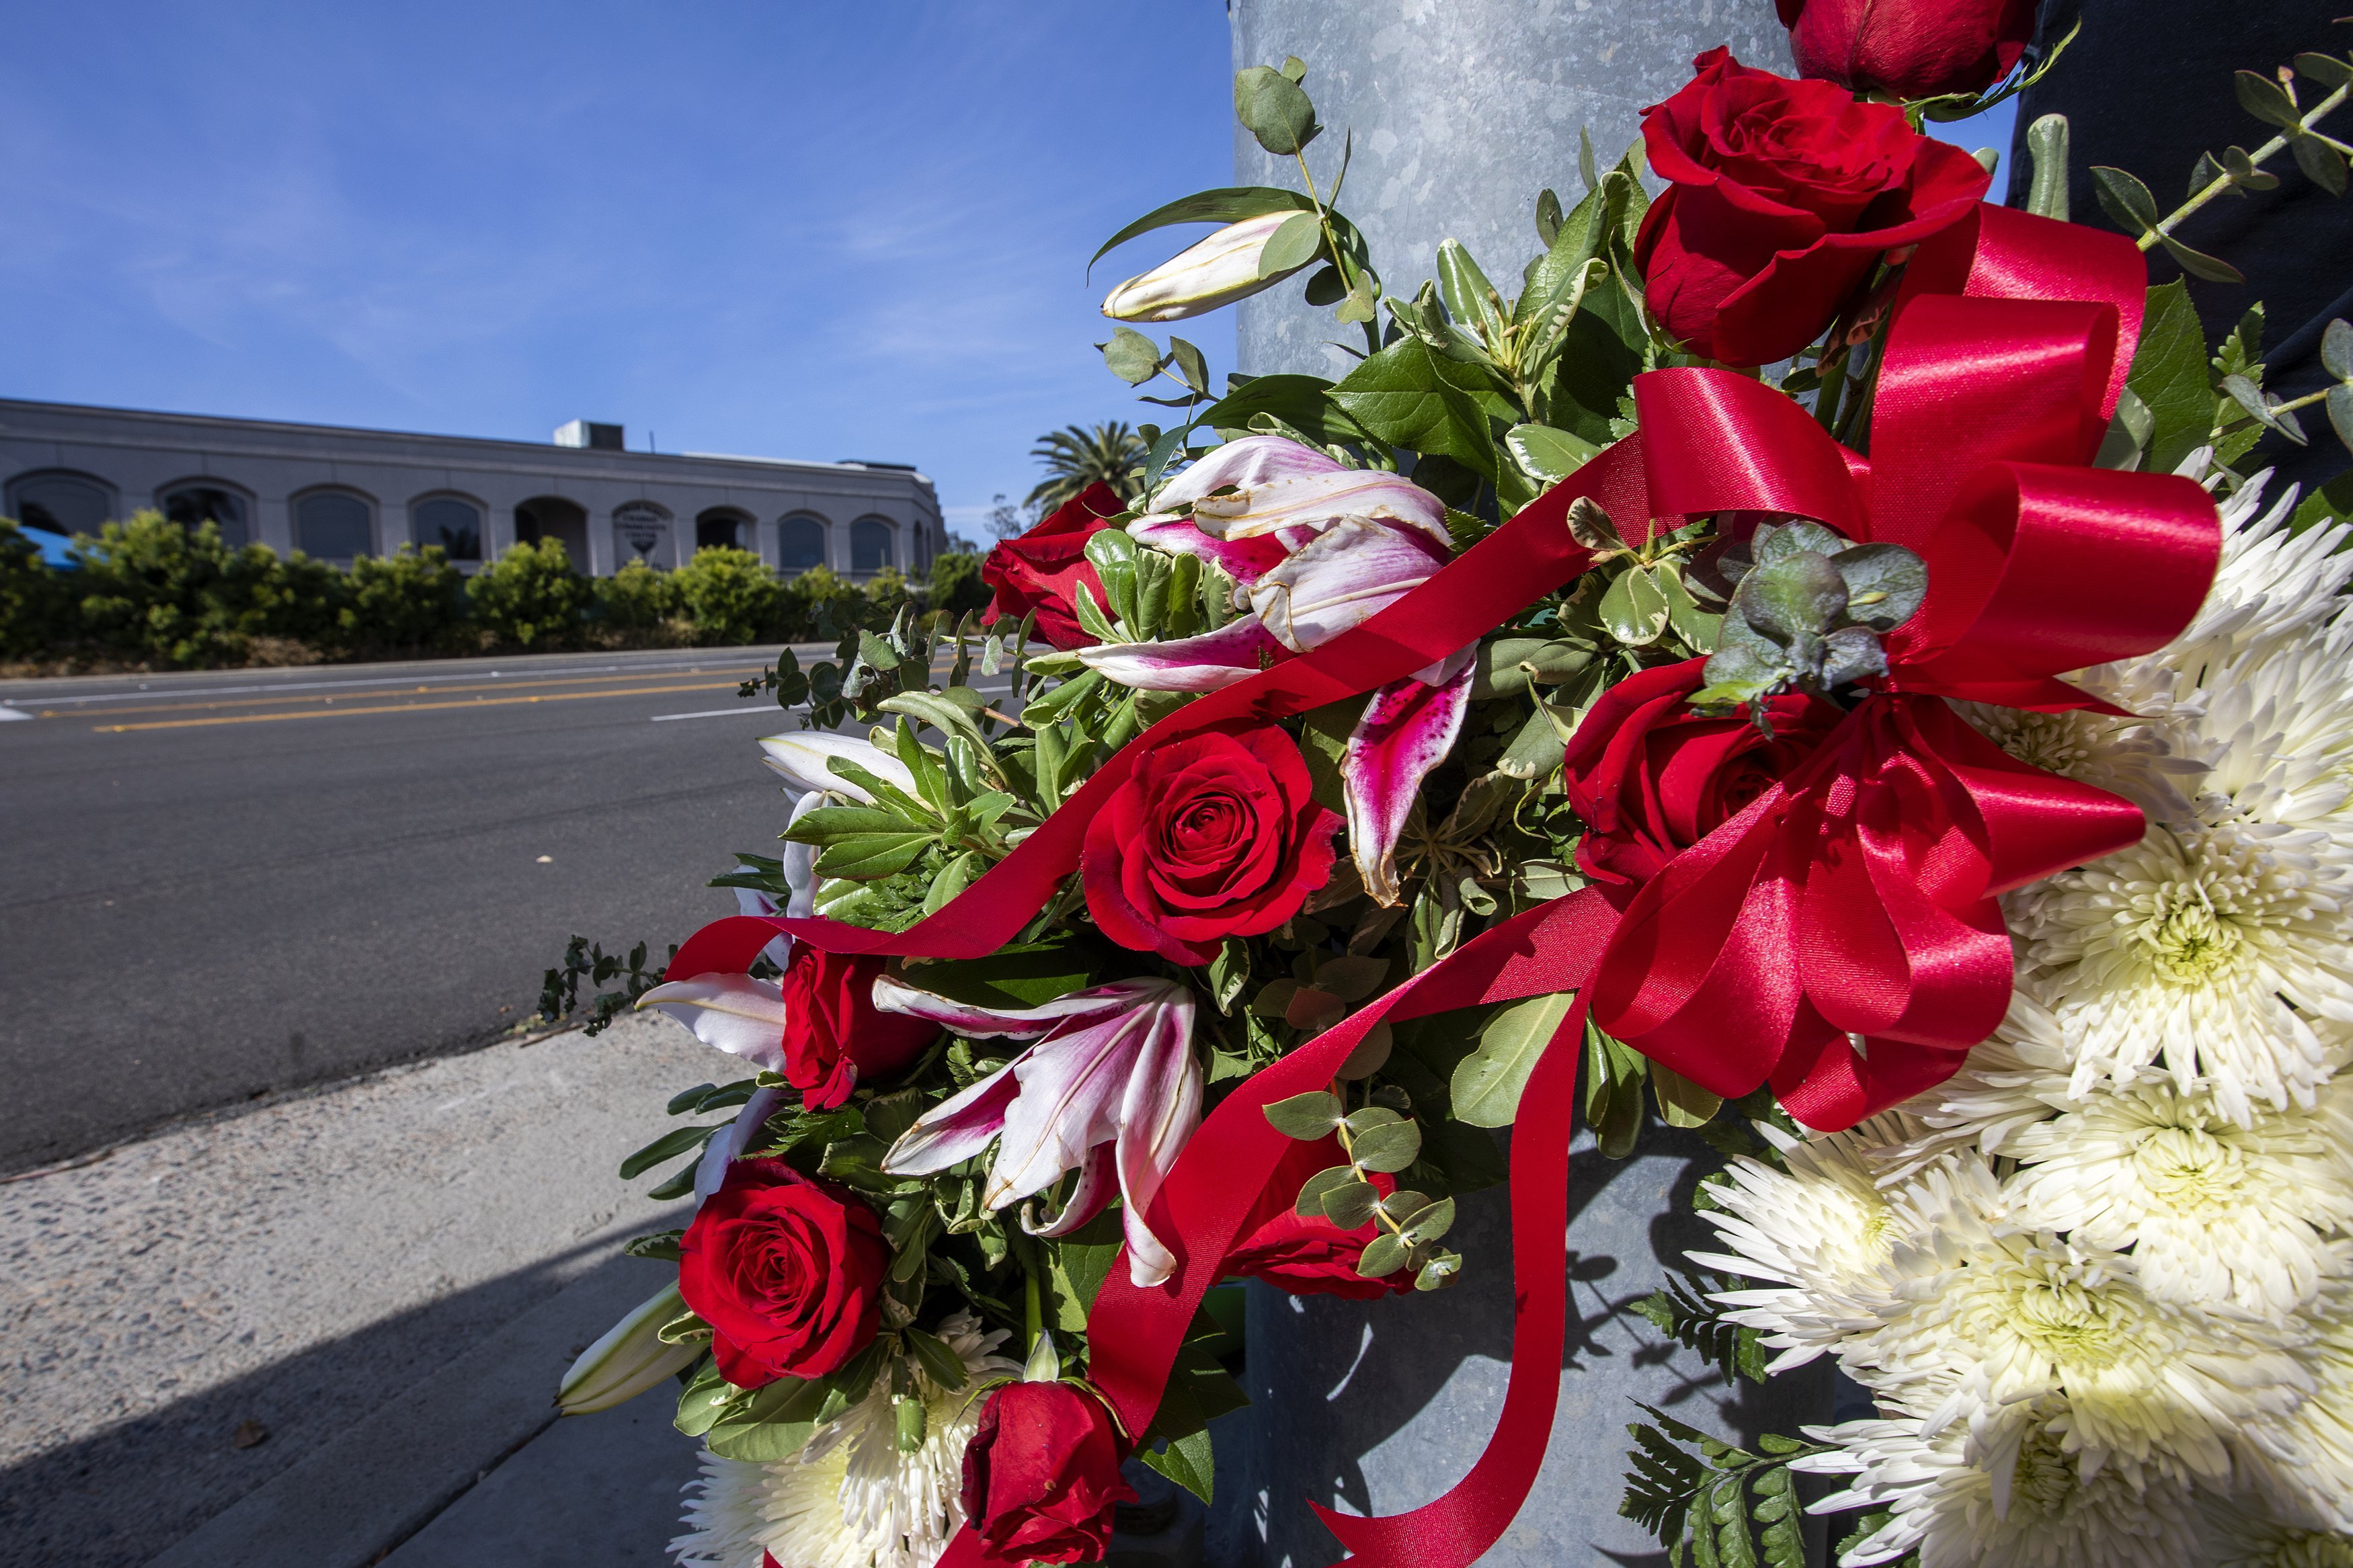 A wreath left outside the Congregation Chabad synagogue in Poway, California | Photo: Getty Images